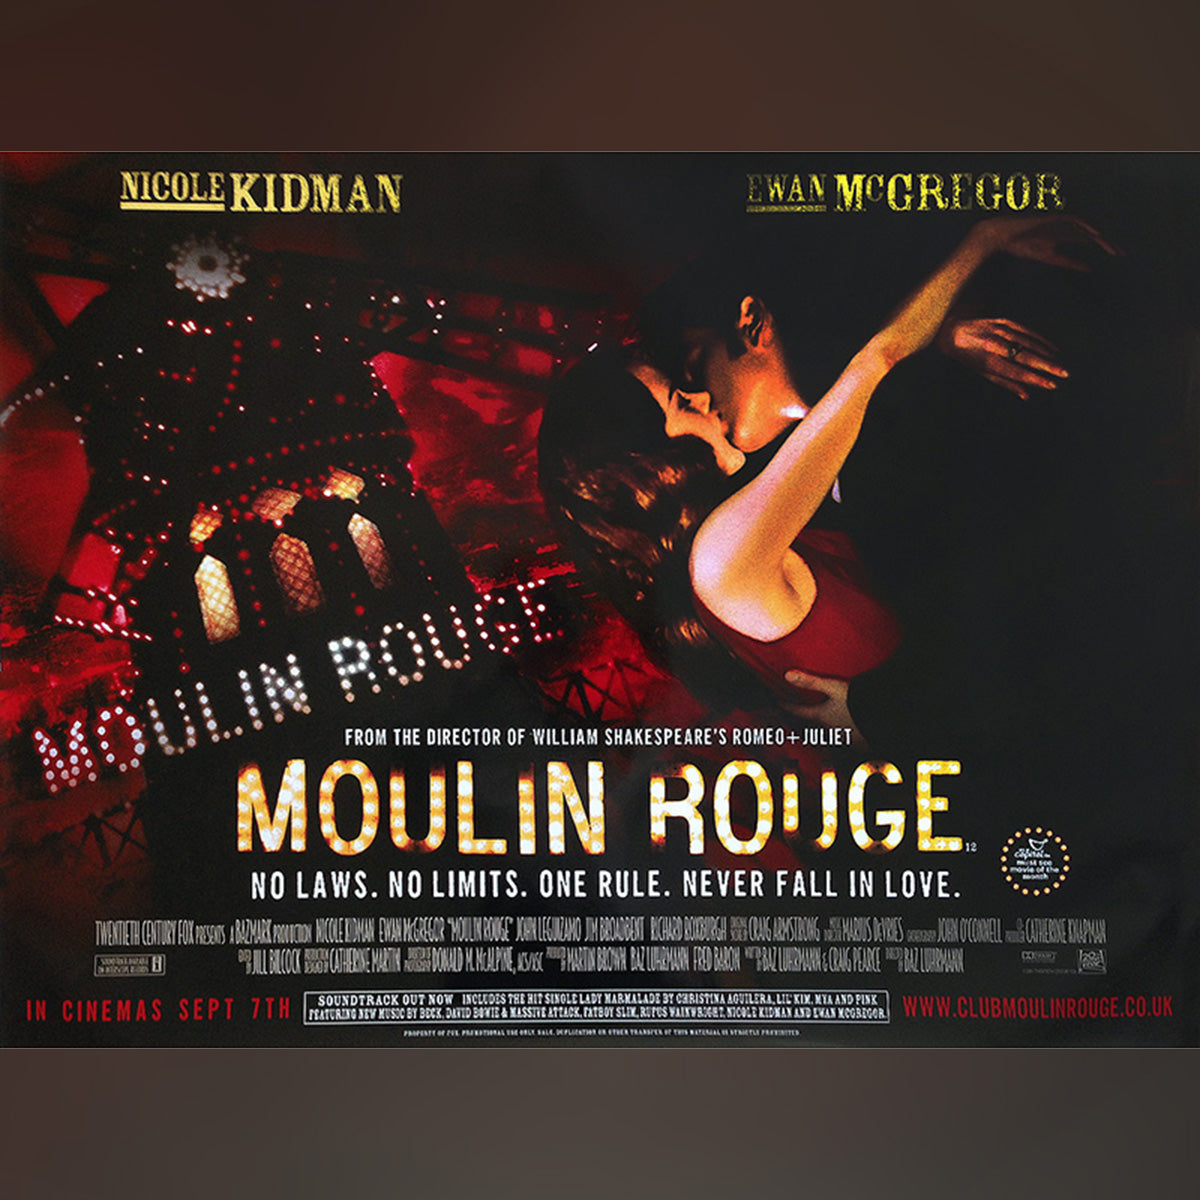 Original Movie Poster of Moulin Rouge! (2001)